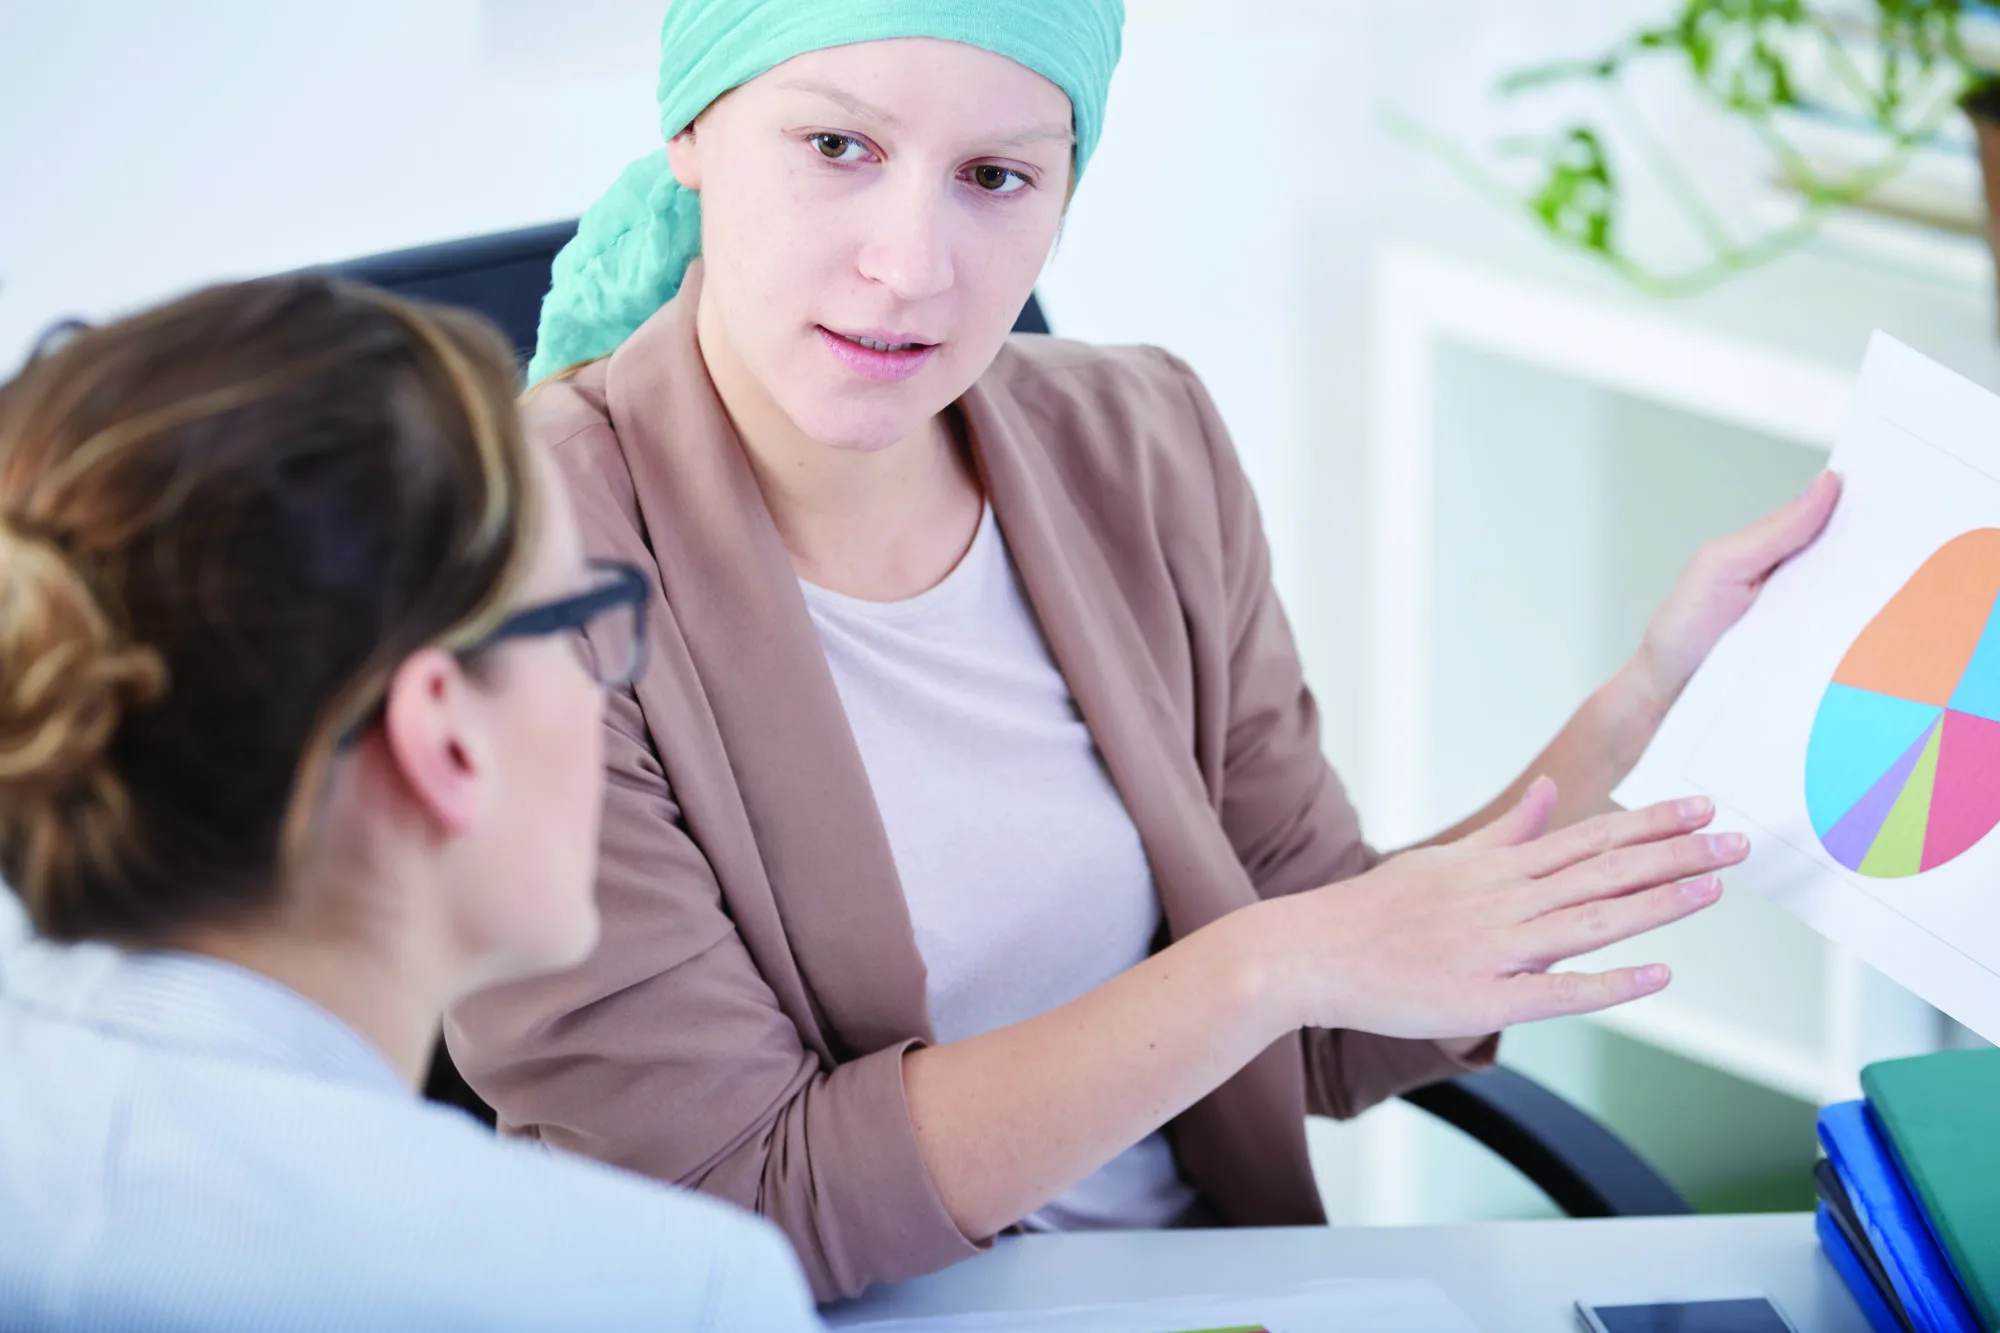 Cancer In The Workplace: Where Is SA On This Issue?